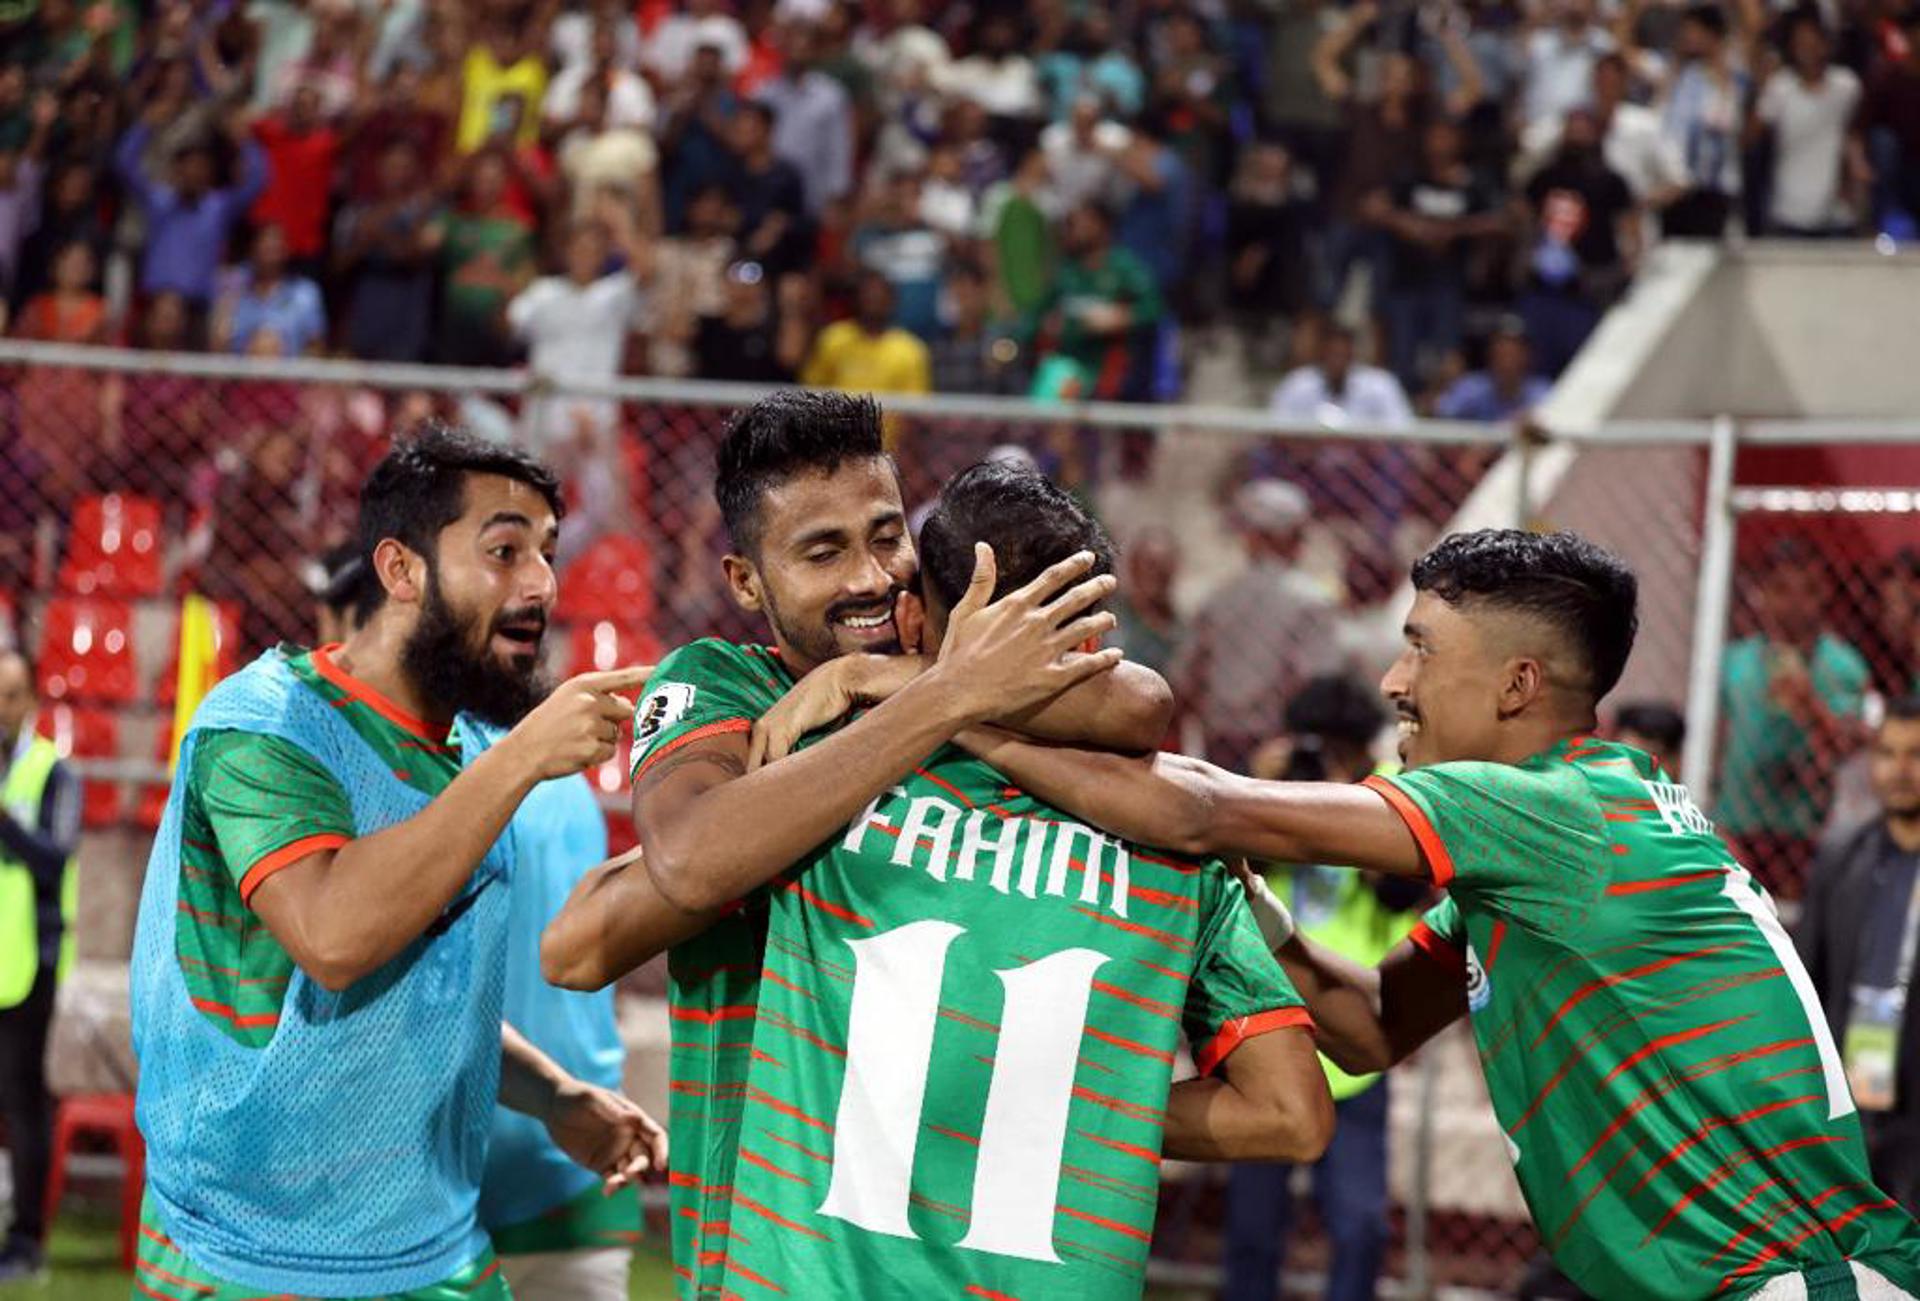 A photo made available by the Bangladesh Football Federation shows Bangladesh players celebrating after their 2-1 victory over the Maldives in the second leg of the pre-qualifying match in Dhaka, Bangladesh. EFE/Bangladesh Football Federation HANDOUT
